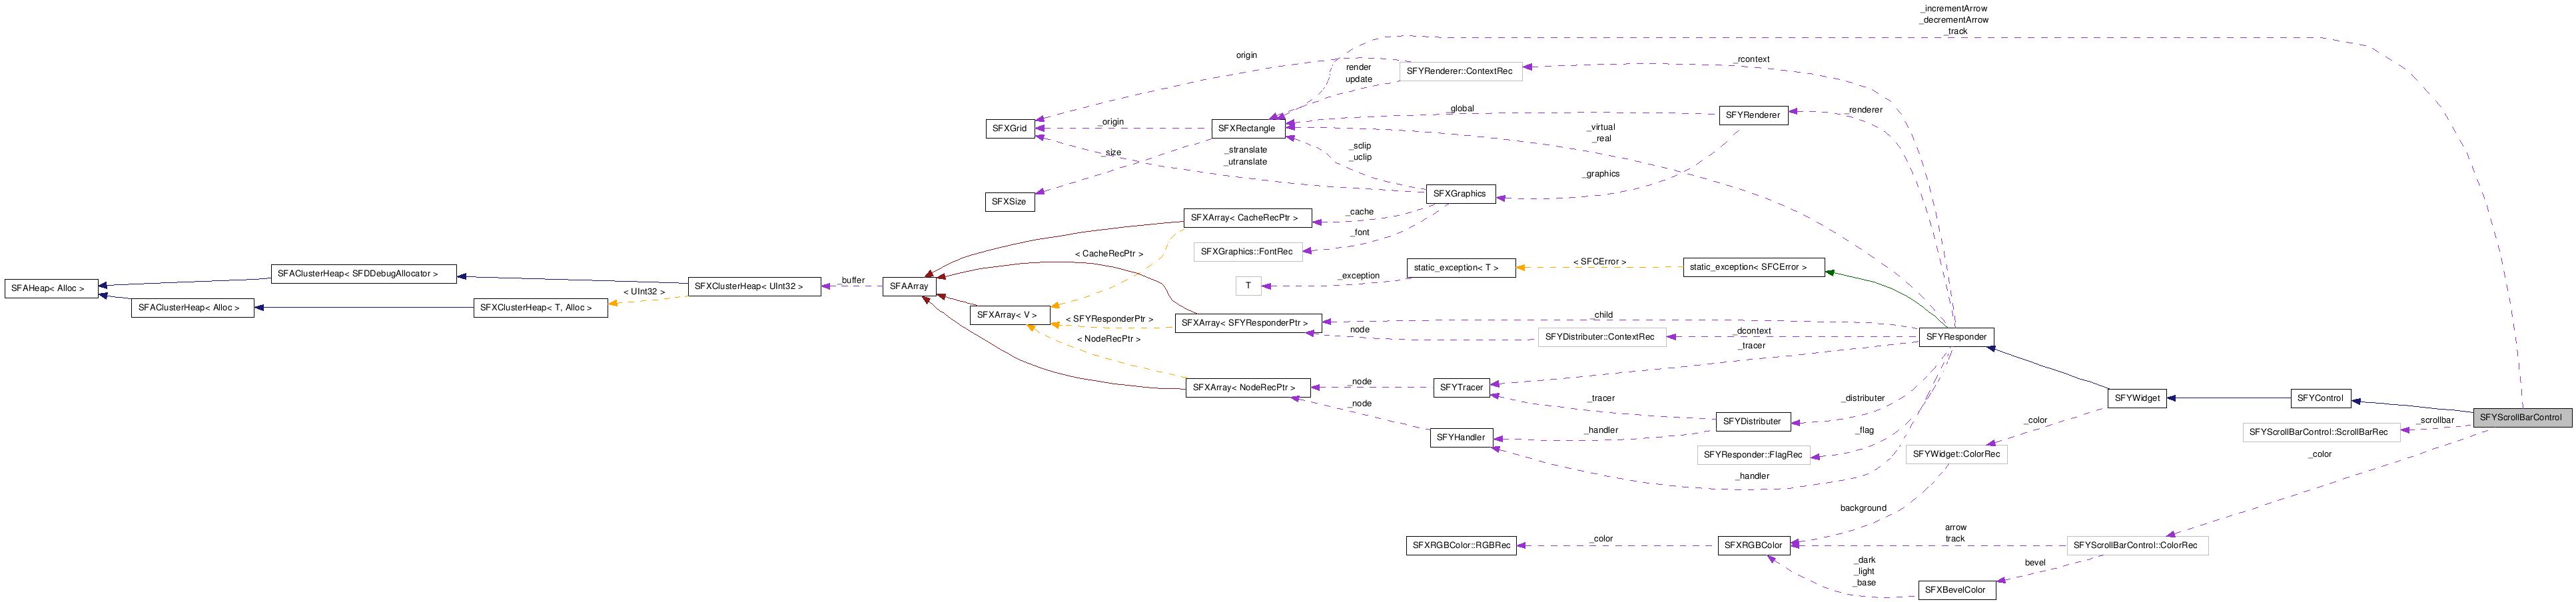  Collaboration diagram of SFYScrollBarControlClass